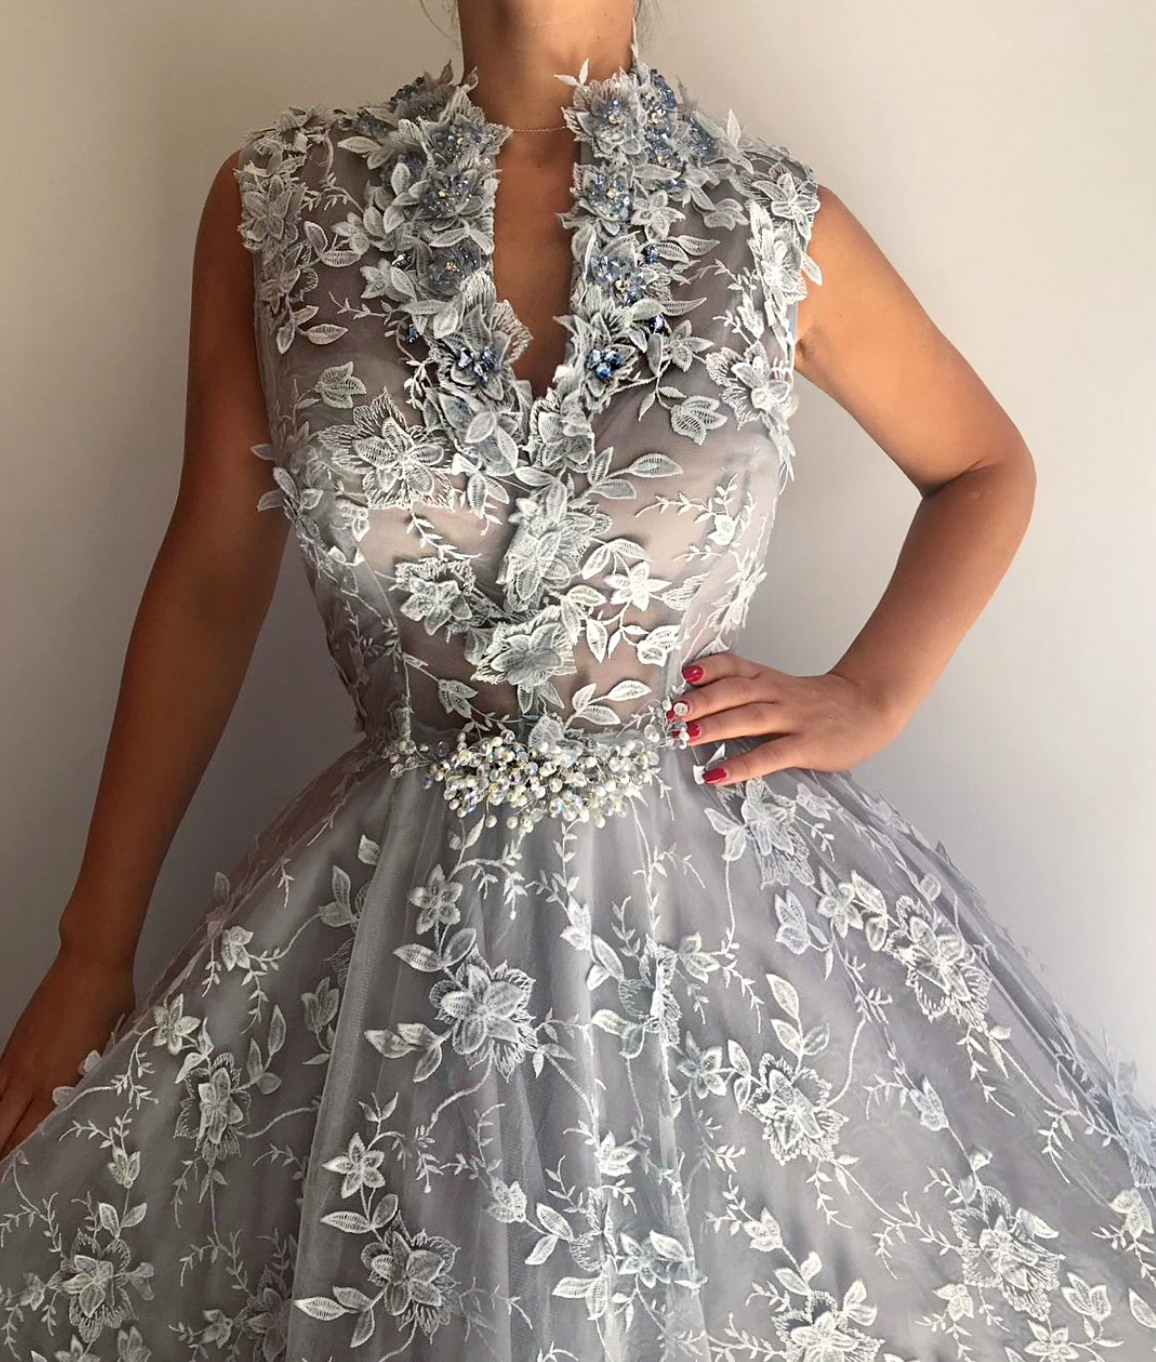 Grey A-Line dress with no sleeves, lace and embroidery